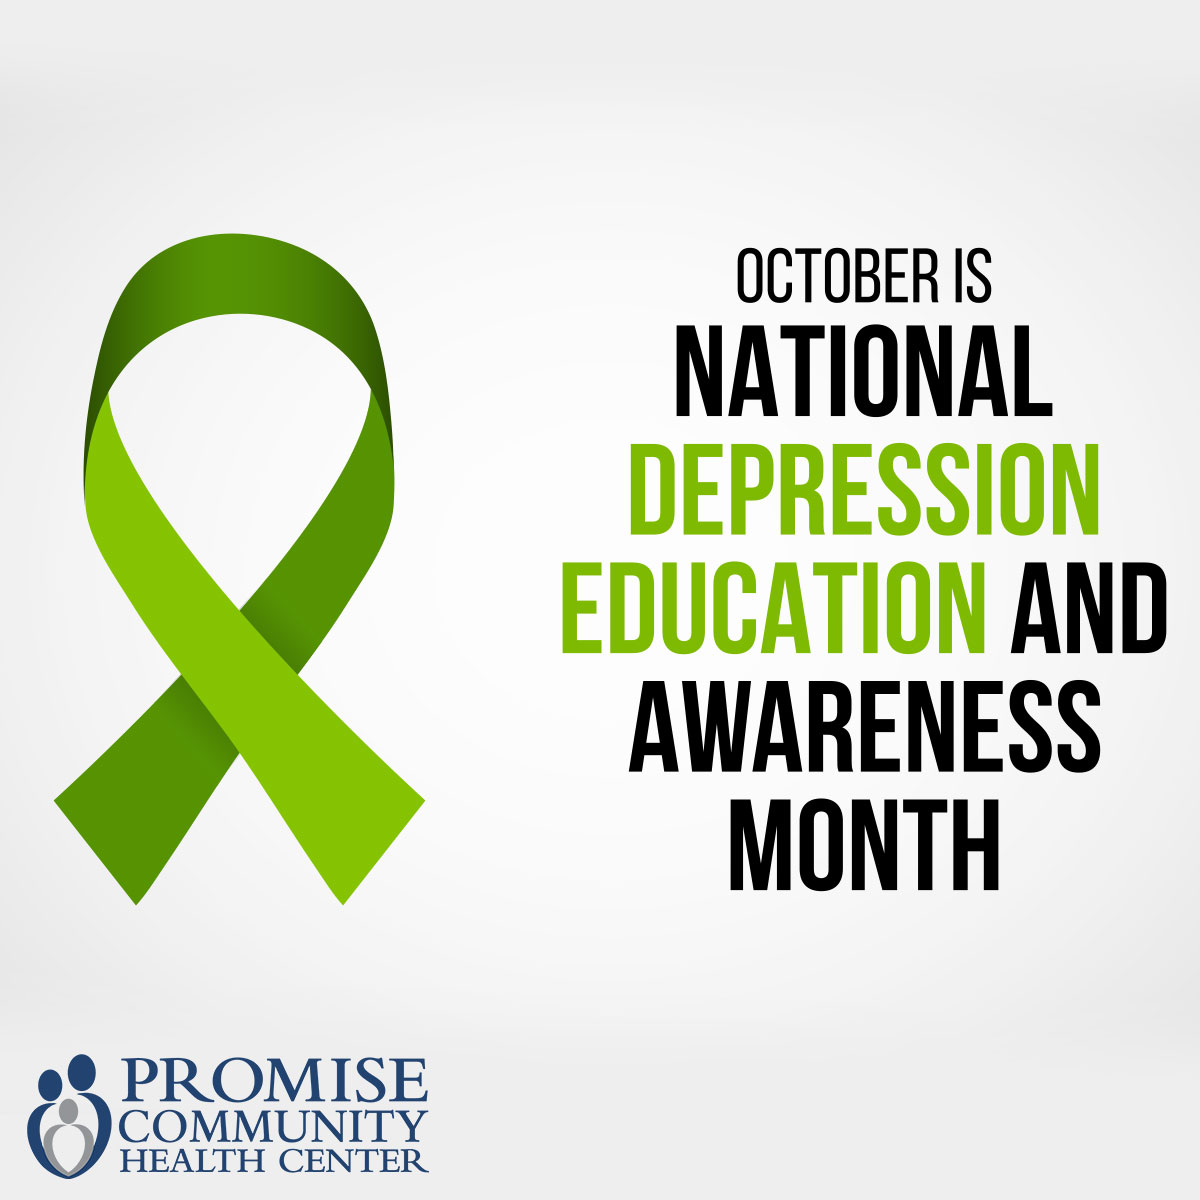 October is National Depression Education and Awareness Month